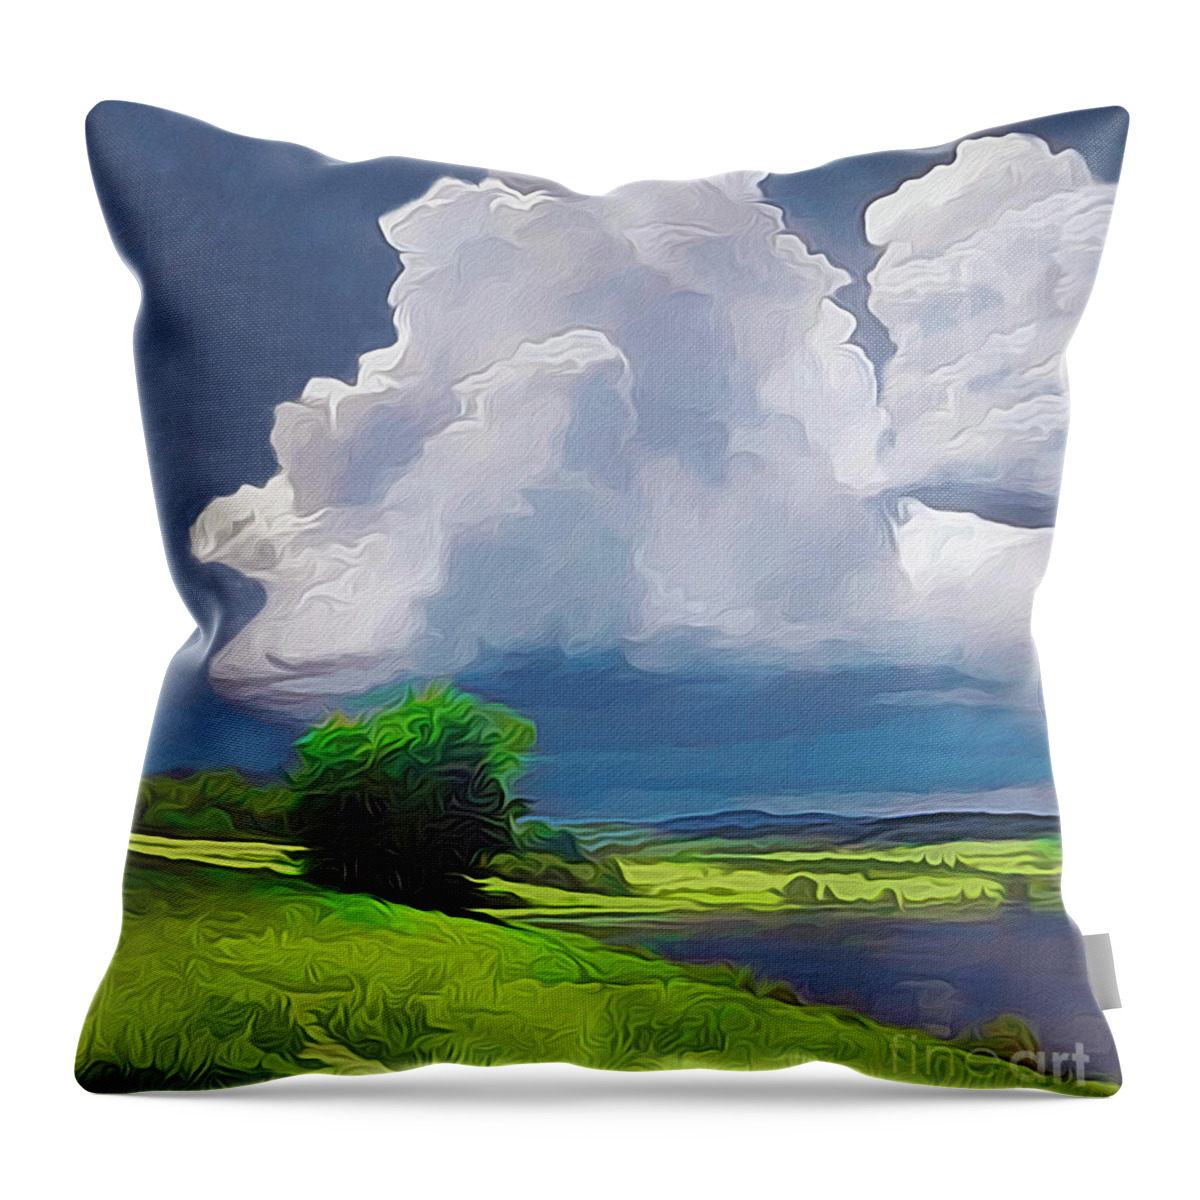 Cloud Throw Pillow featuring the digital art Painted Clouds by Walter Colvin